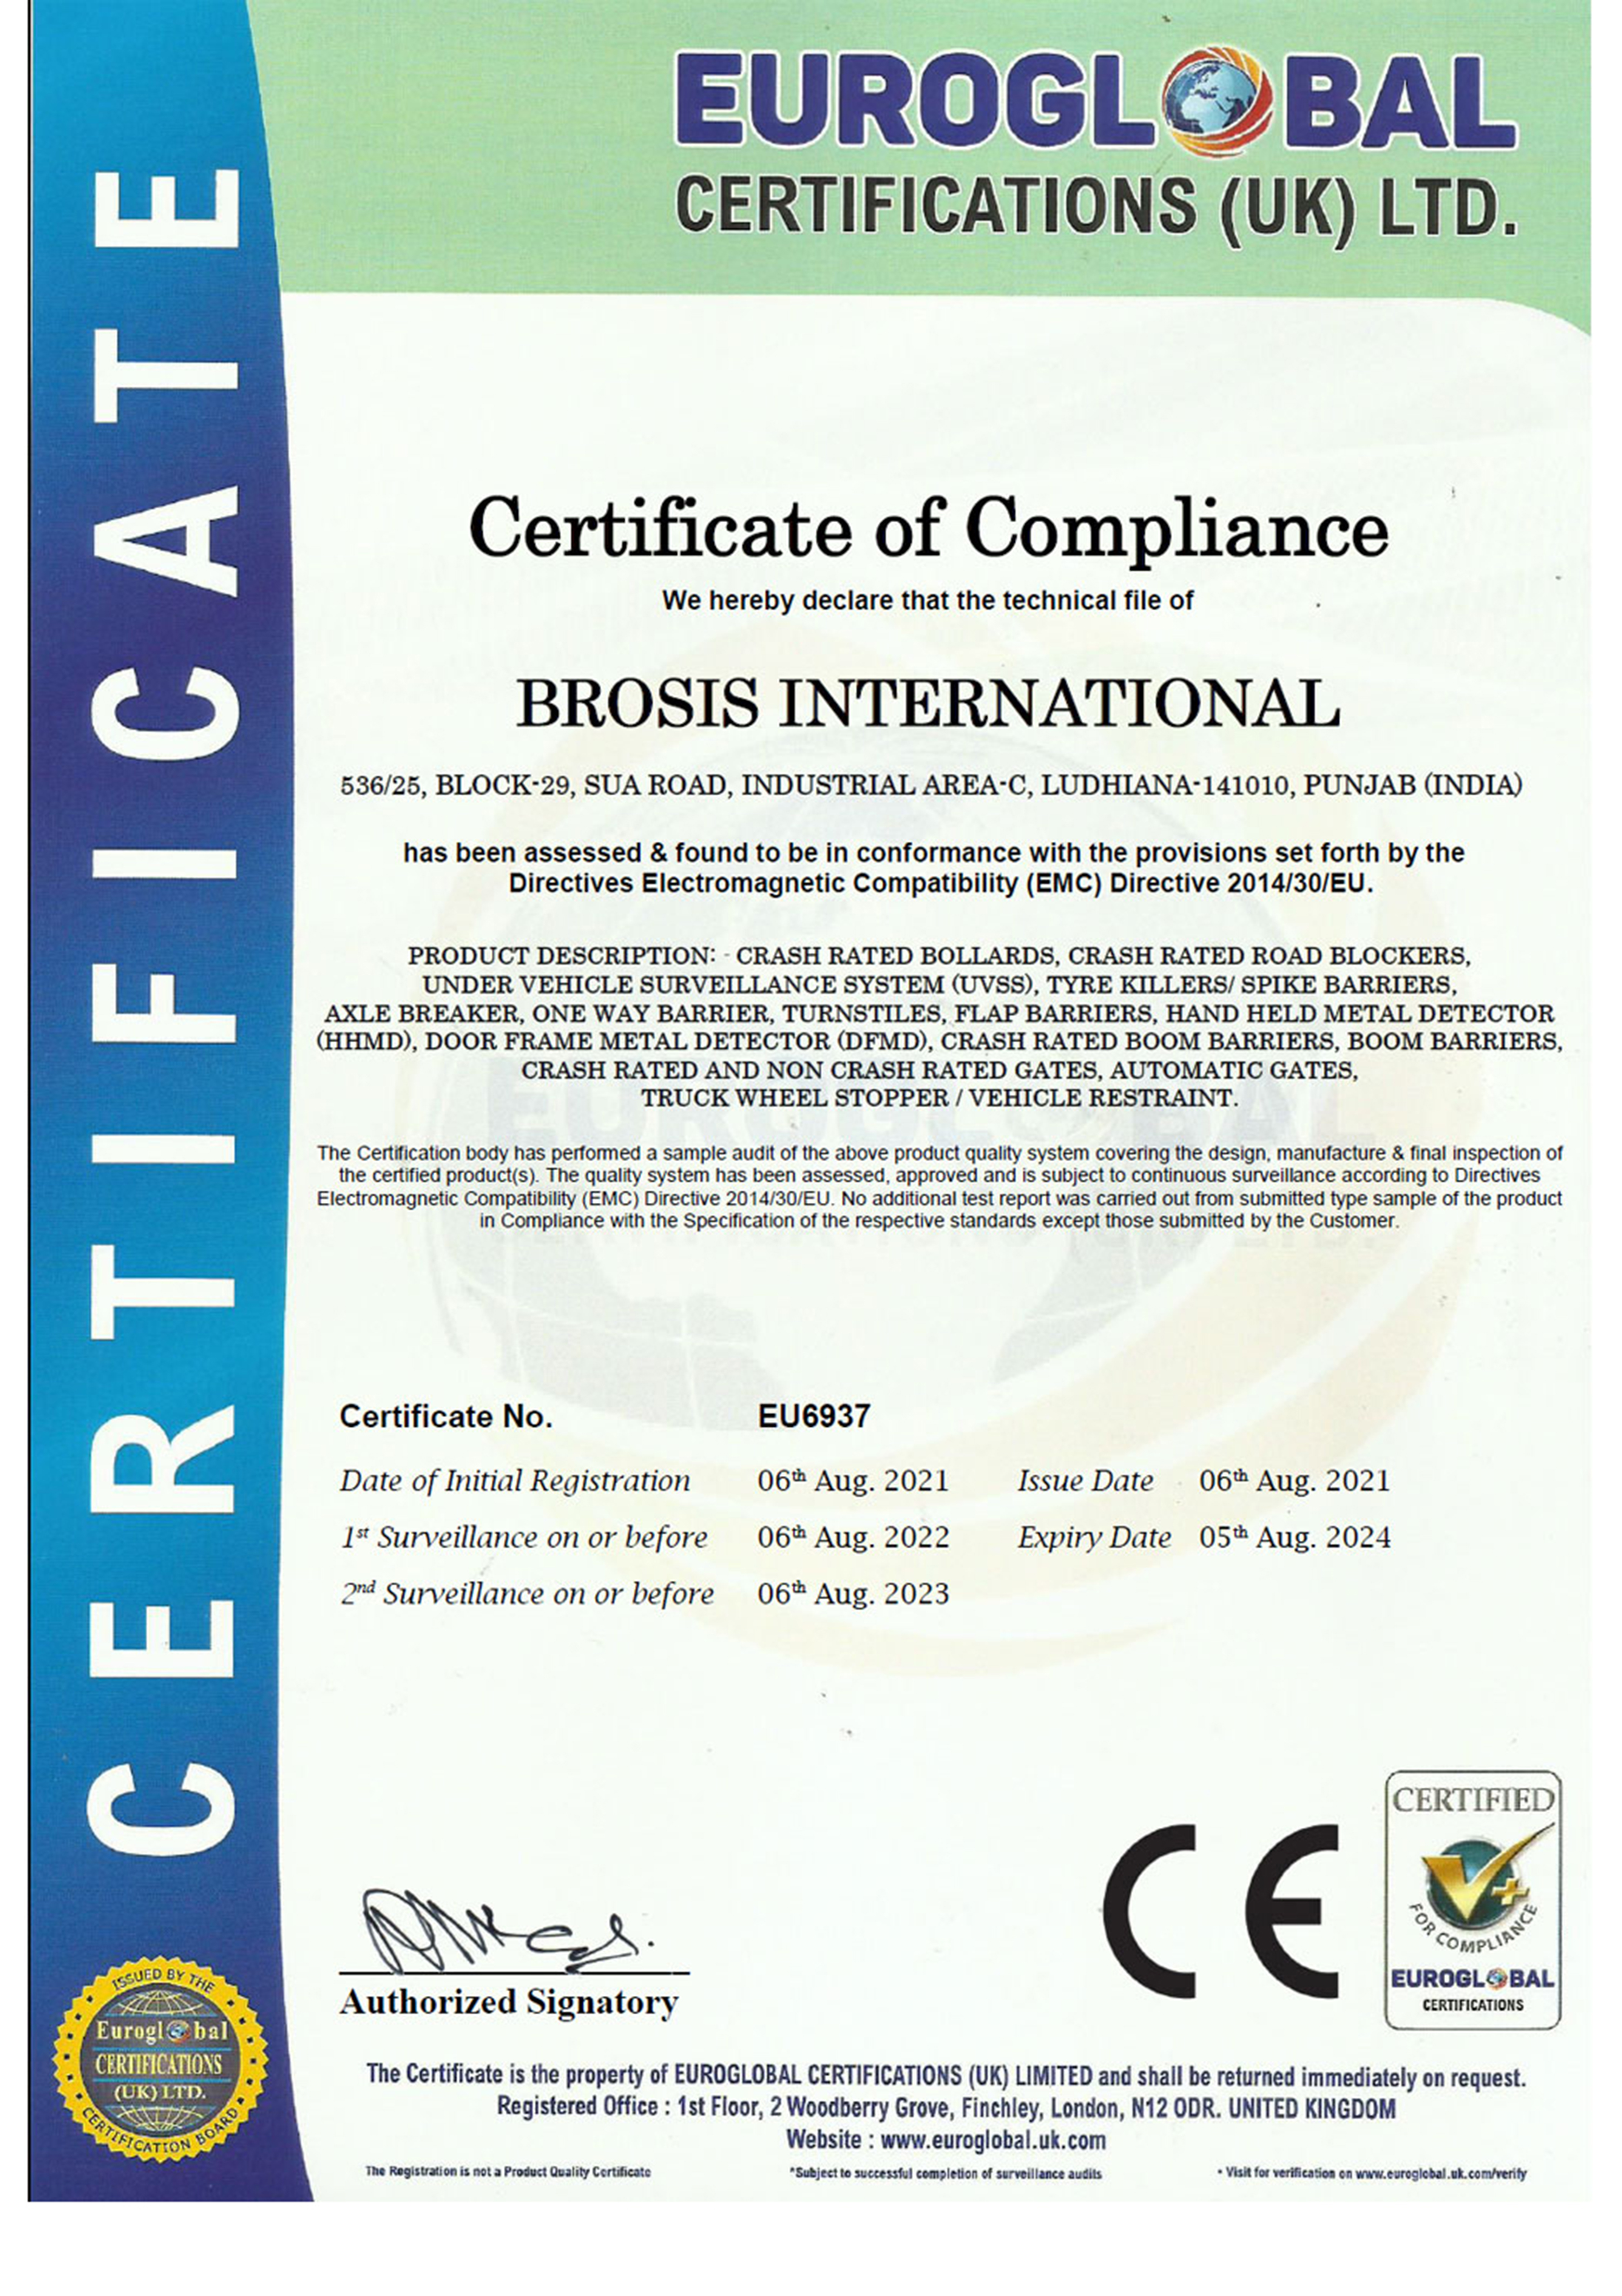 Certifications Brosis International Security Equipments manufacturers exporters in India Ludhiana